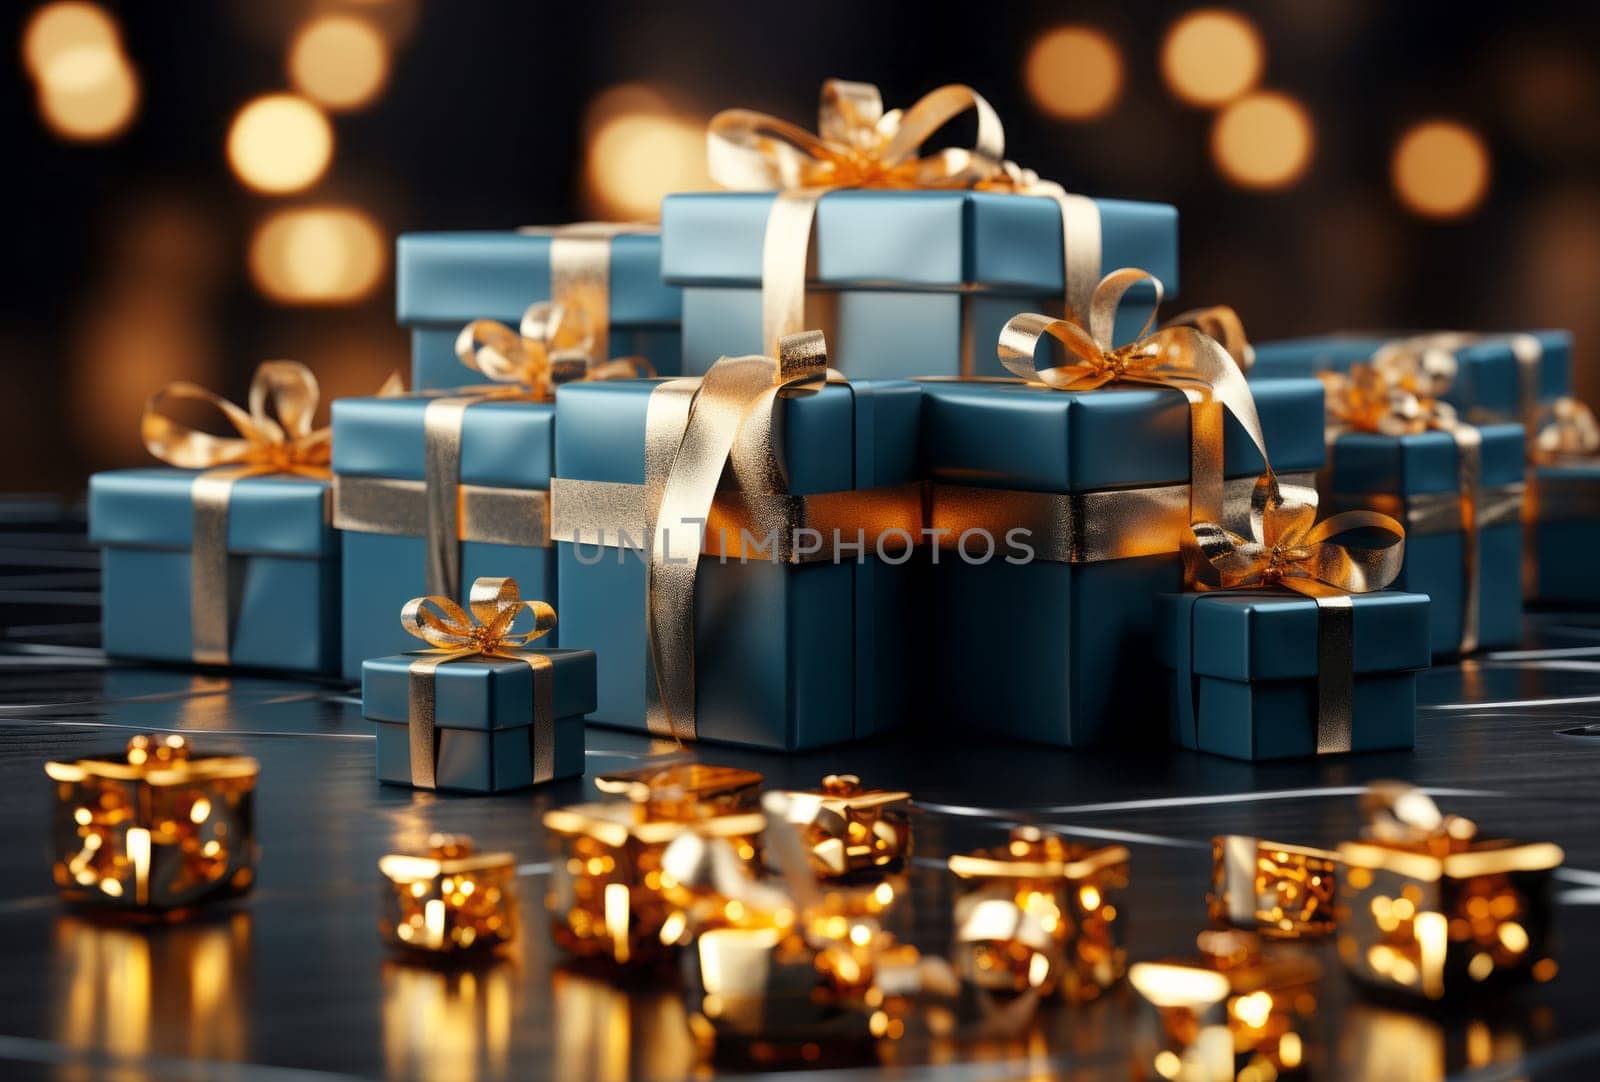 A breathtaking holiday scene with lgift boxes with gold ribbons and golden bokeh creates an enchanting atmosphere of celebration and joy. Boxing Day.